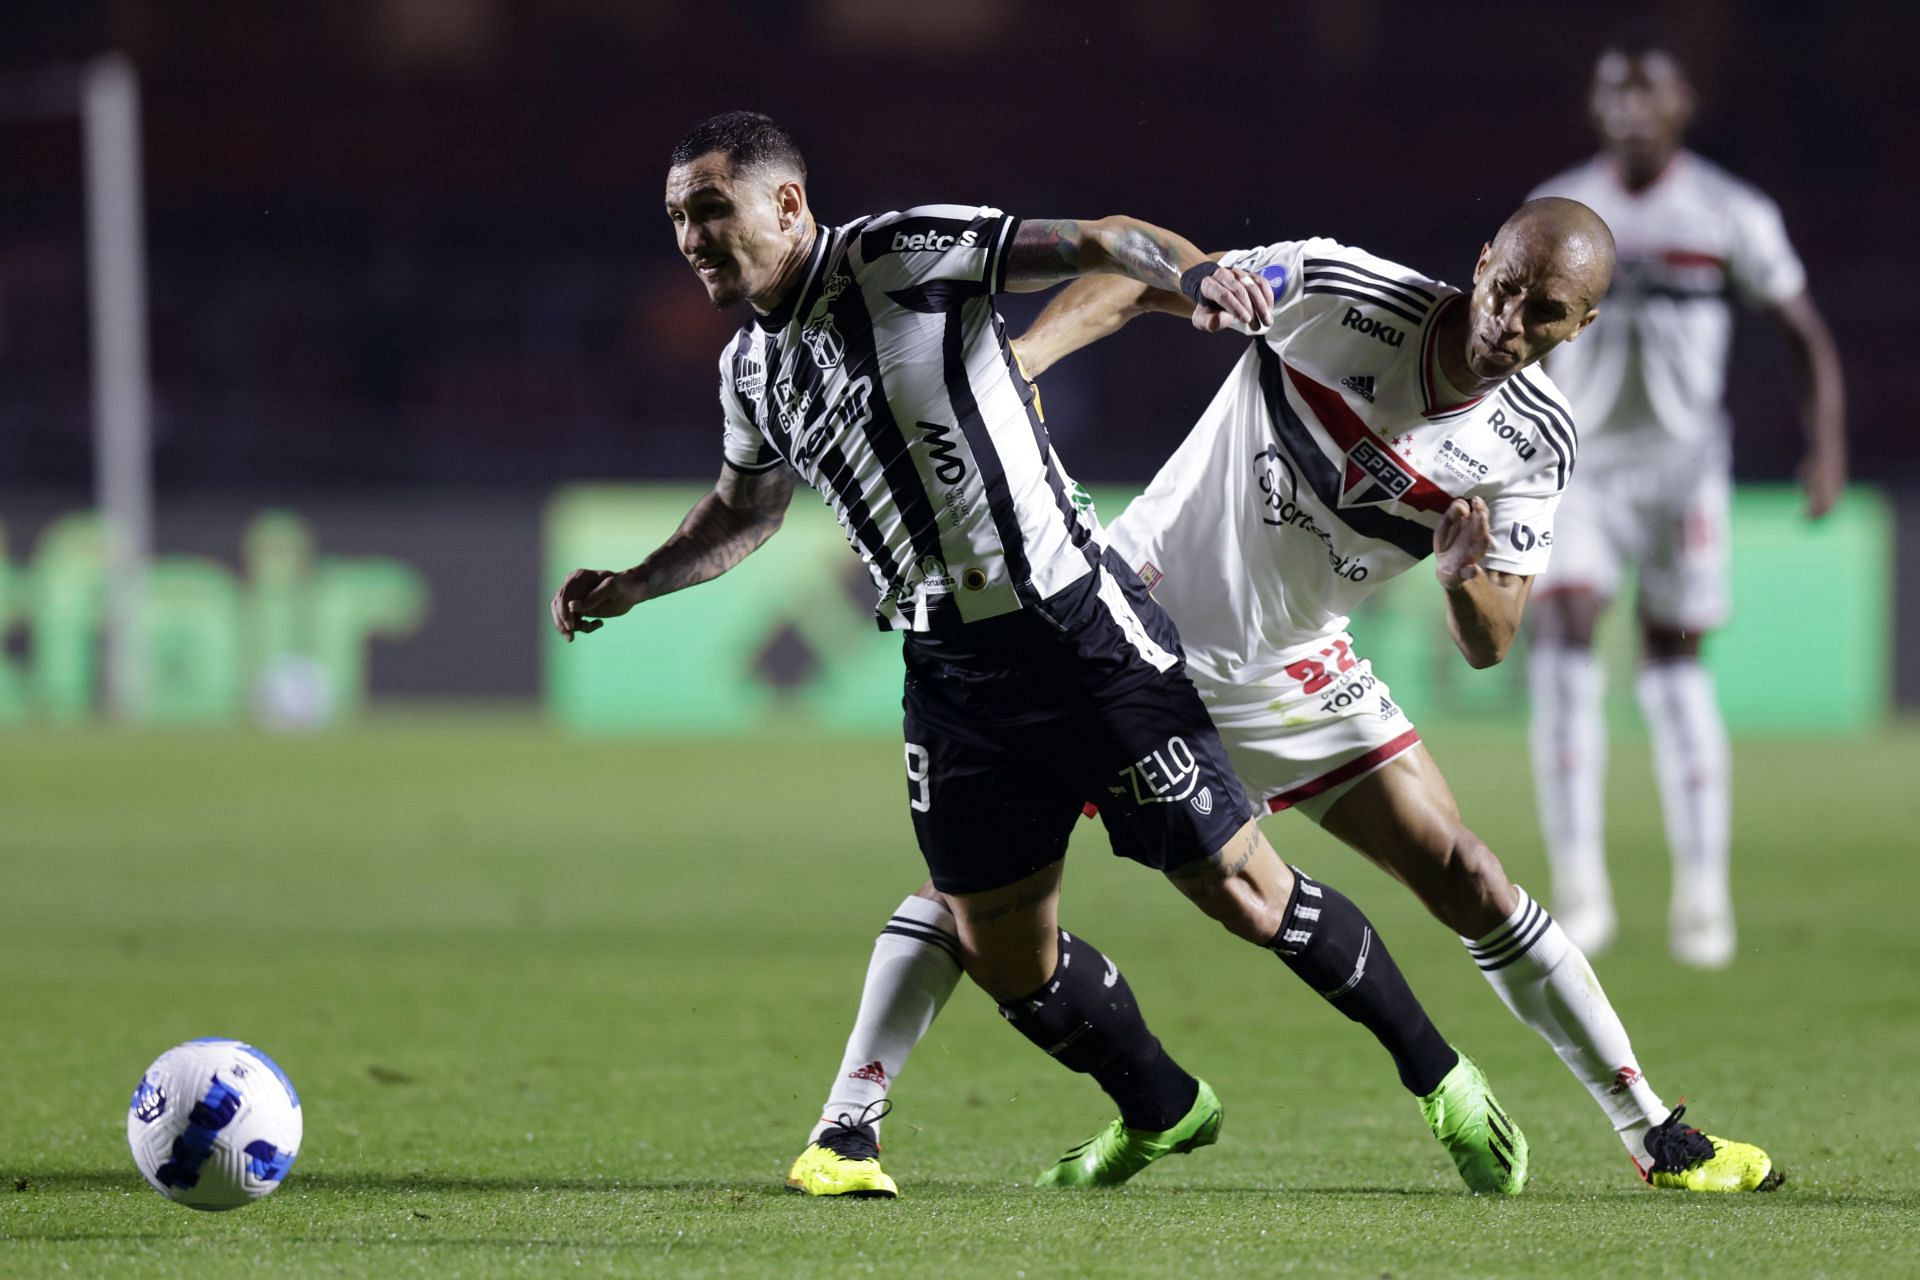 Ceara and Sao Paulo will square off in their Copa Sudamericana fixture on Wednesday